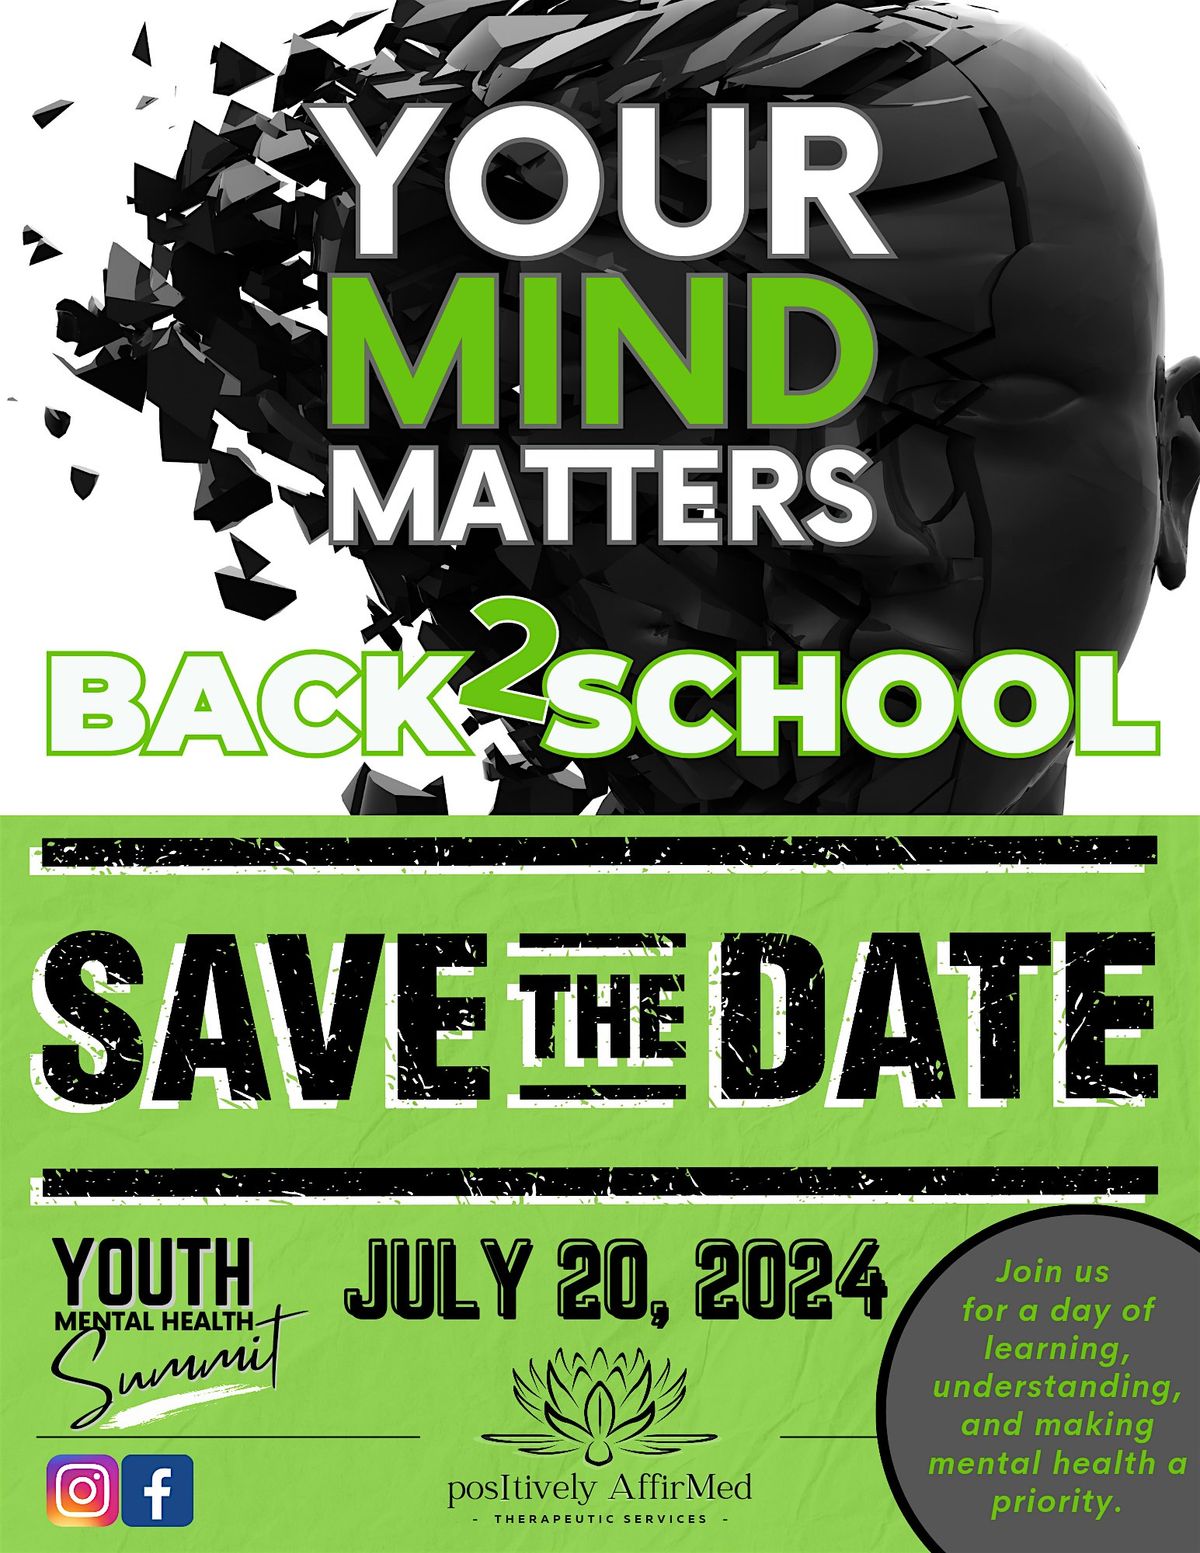 Youth Mental Health Summit: Back 2 School Experience